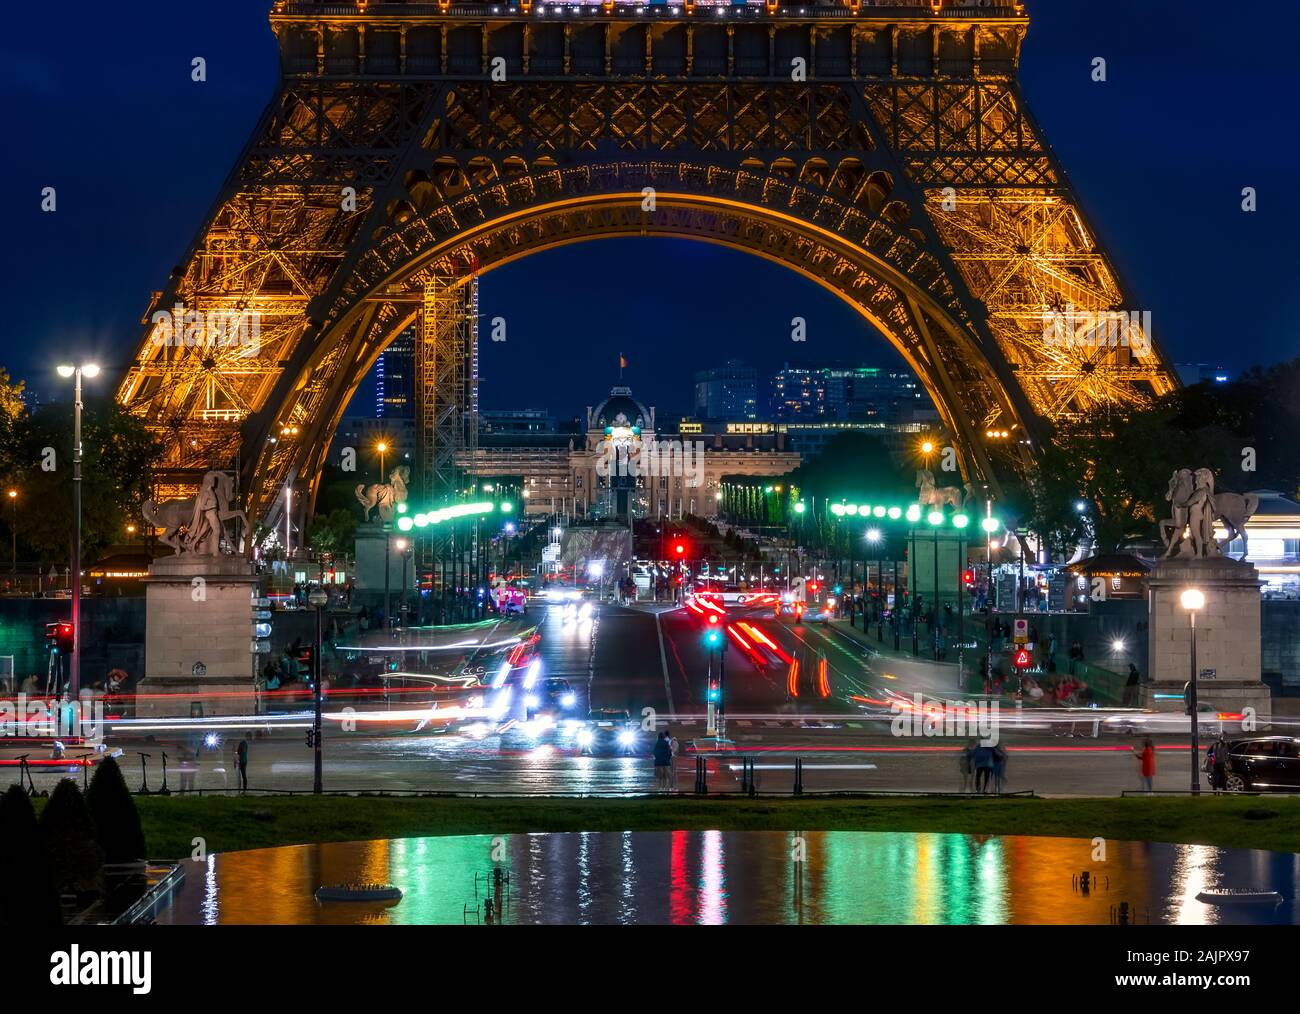 France. Paris. Near the Eiffel tower. Transport, tourists and night illumination of the tower. Reflections in the fountain of the Trocadero Gardens Stock Photo